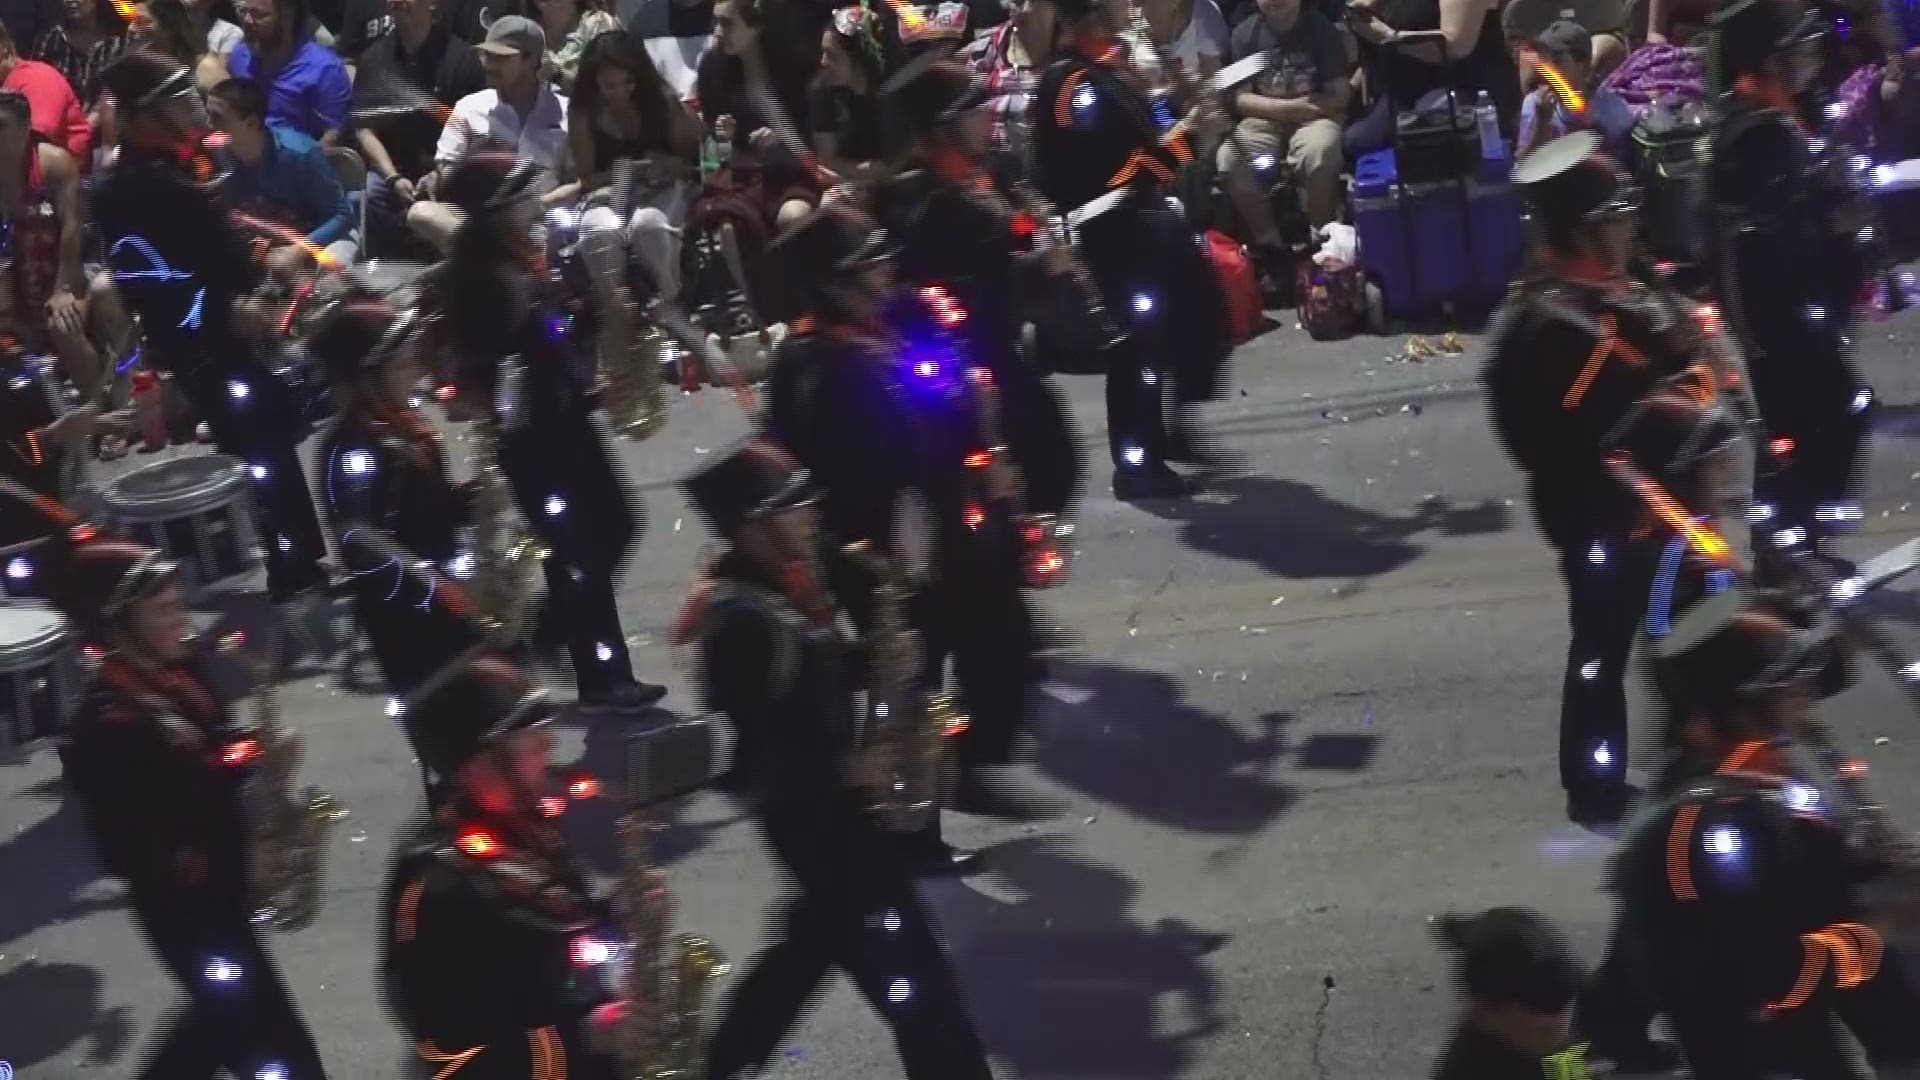 With Chubby Checker leading the way as grand marshal, the country's largest light-up parade brought a vibrancy to downtown San Antonio Saturday night.